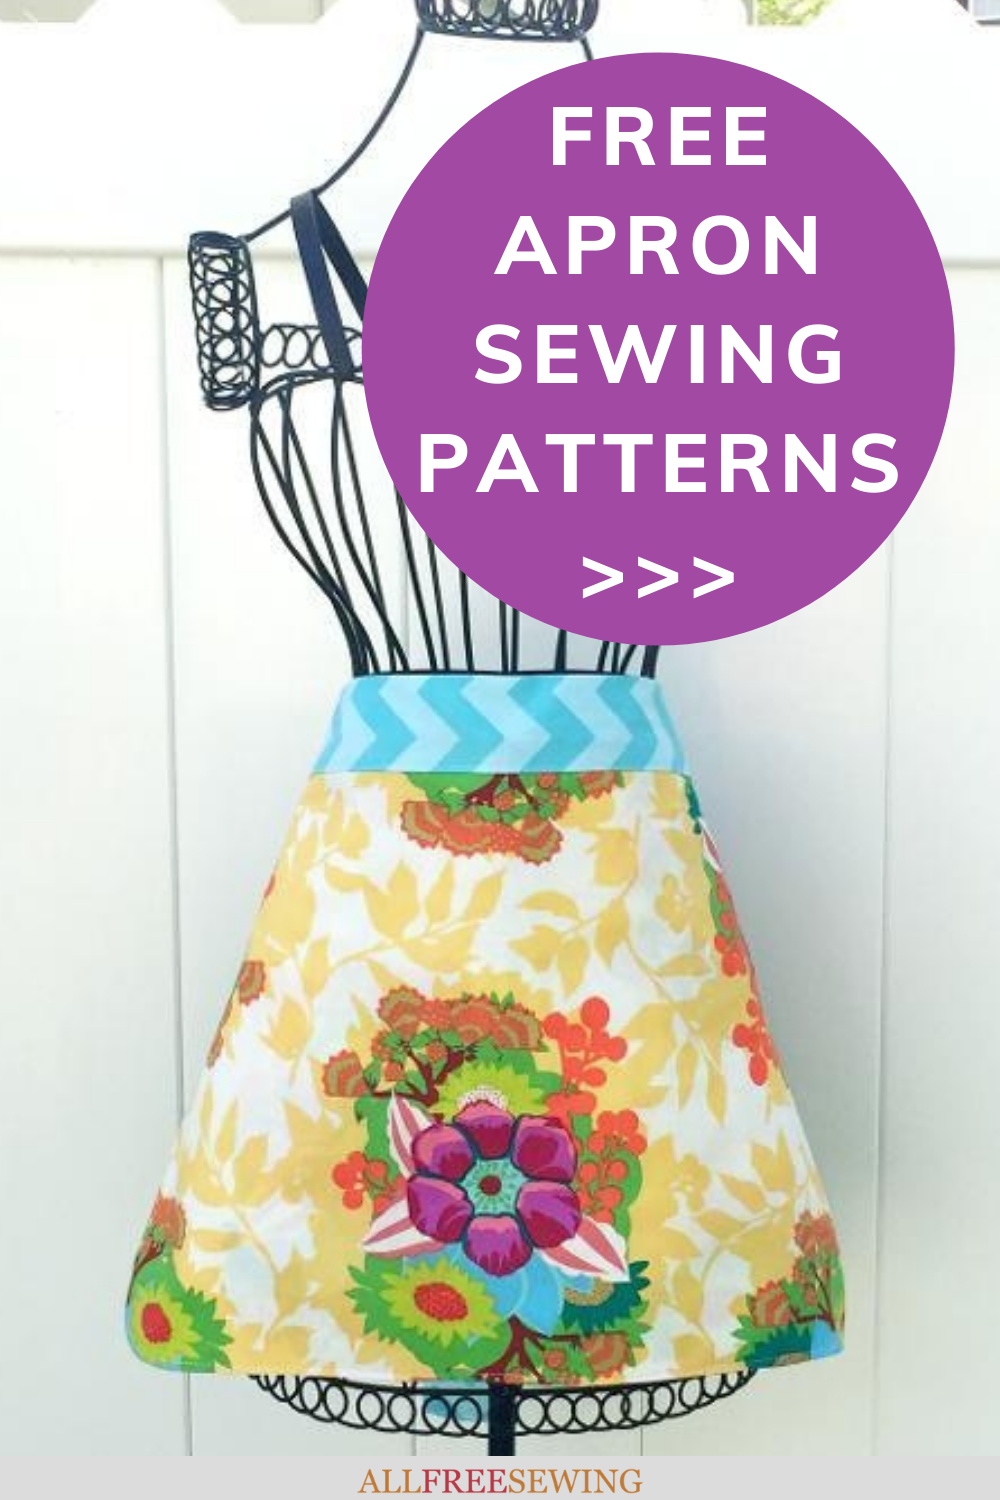 How to Sew an Apron in 10 Minutes (Simple Sewing DIY)